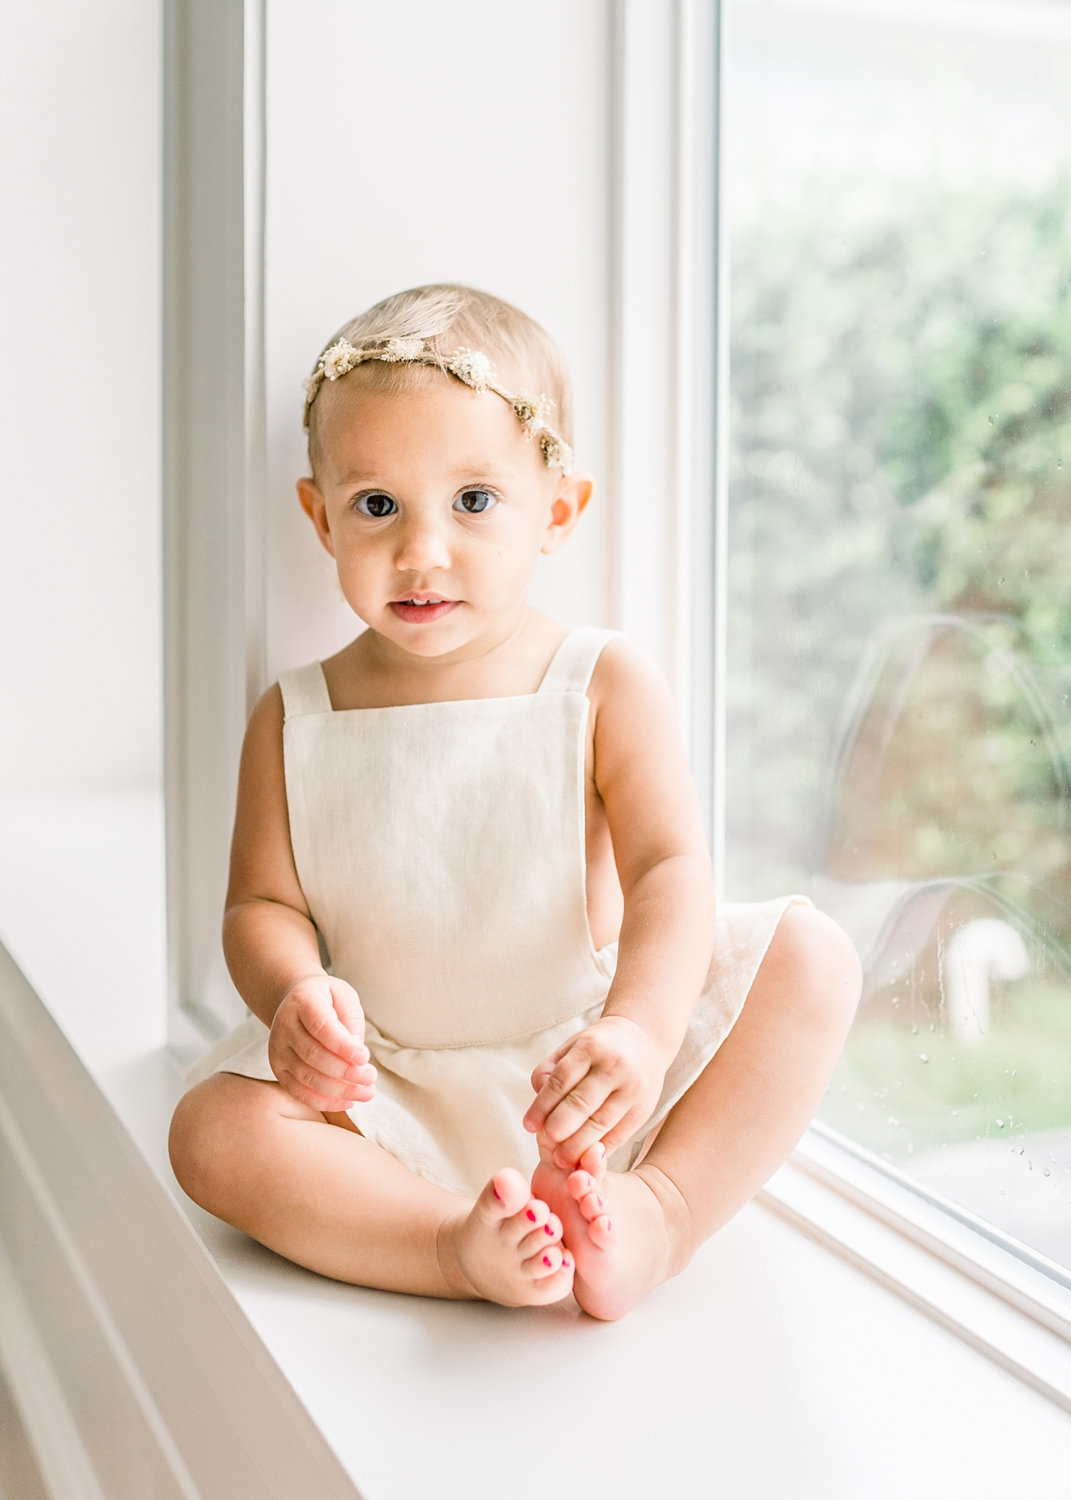 15 month old girl with painted toenails, window portrait, Ryaphotos